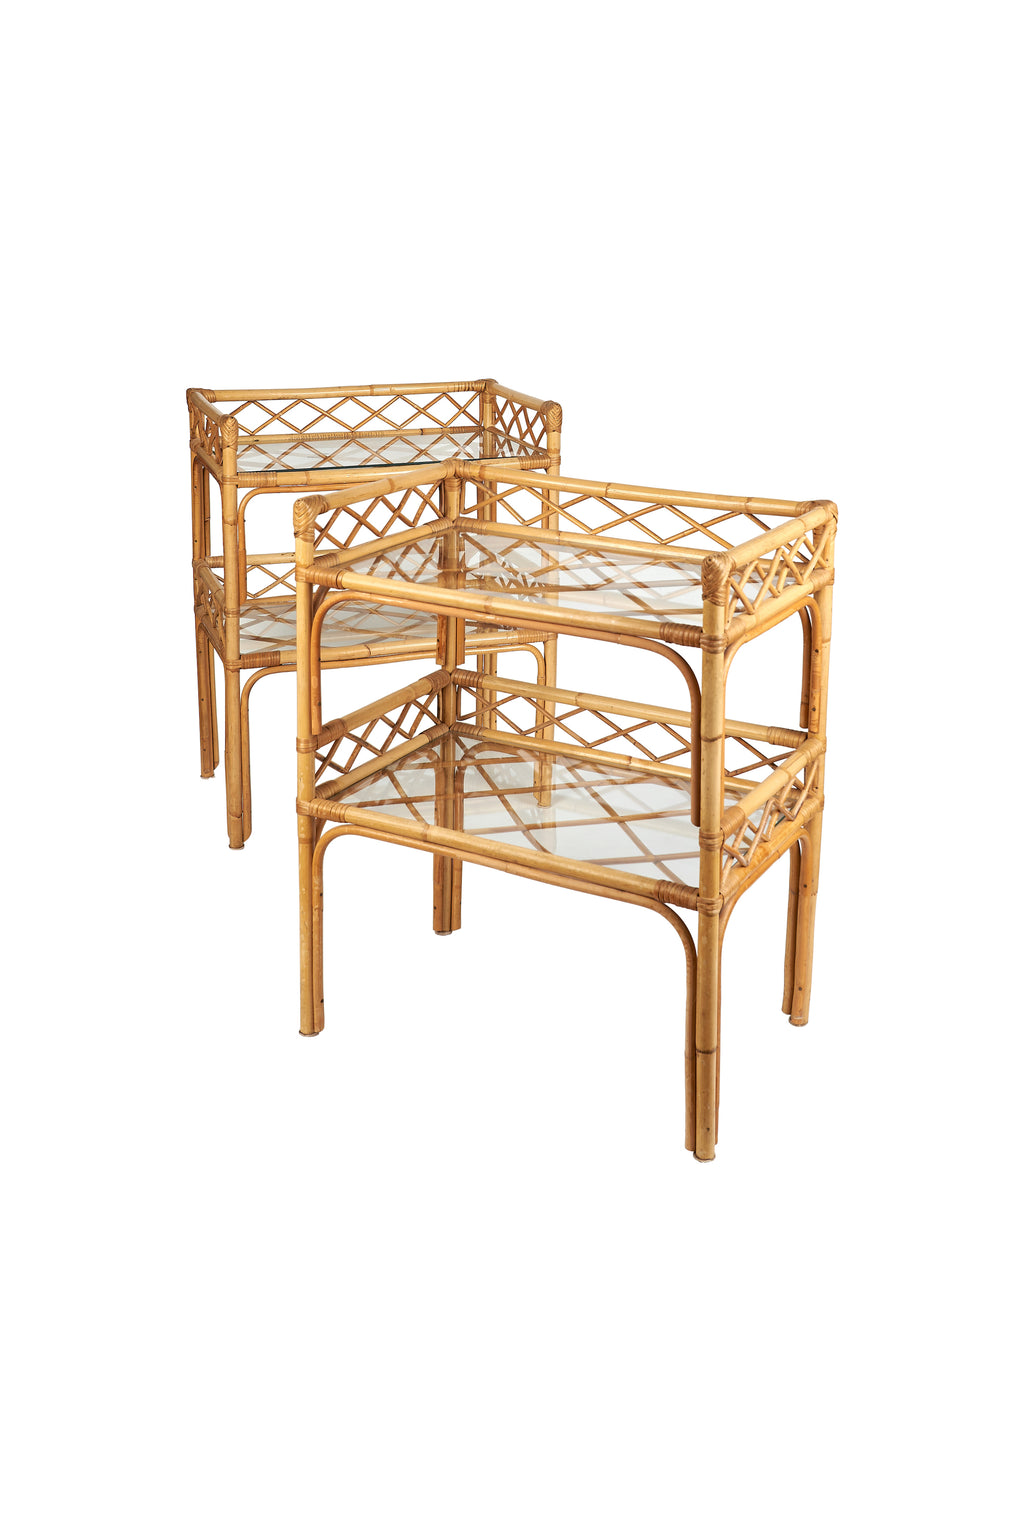 Pair of Vintage Bamboo, Rattan & Glass Side Tables